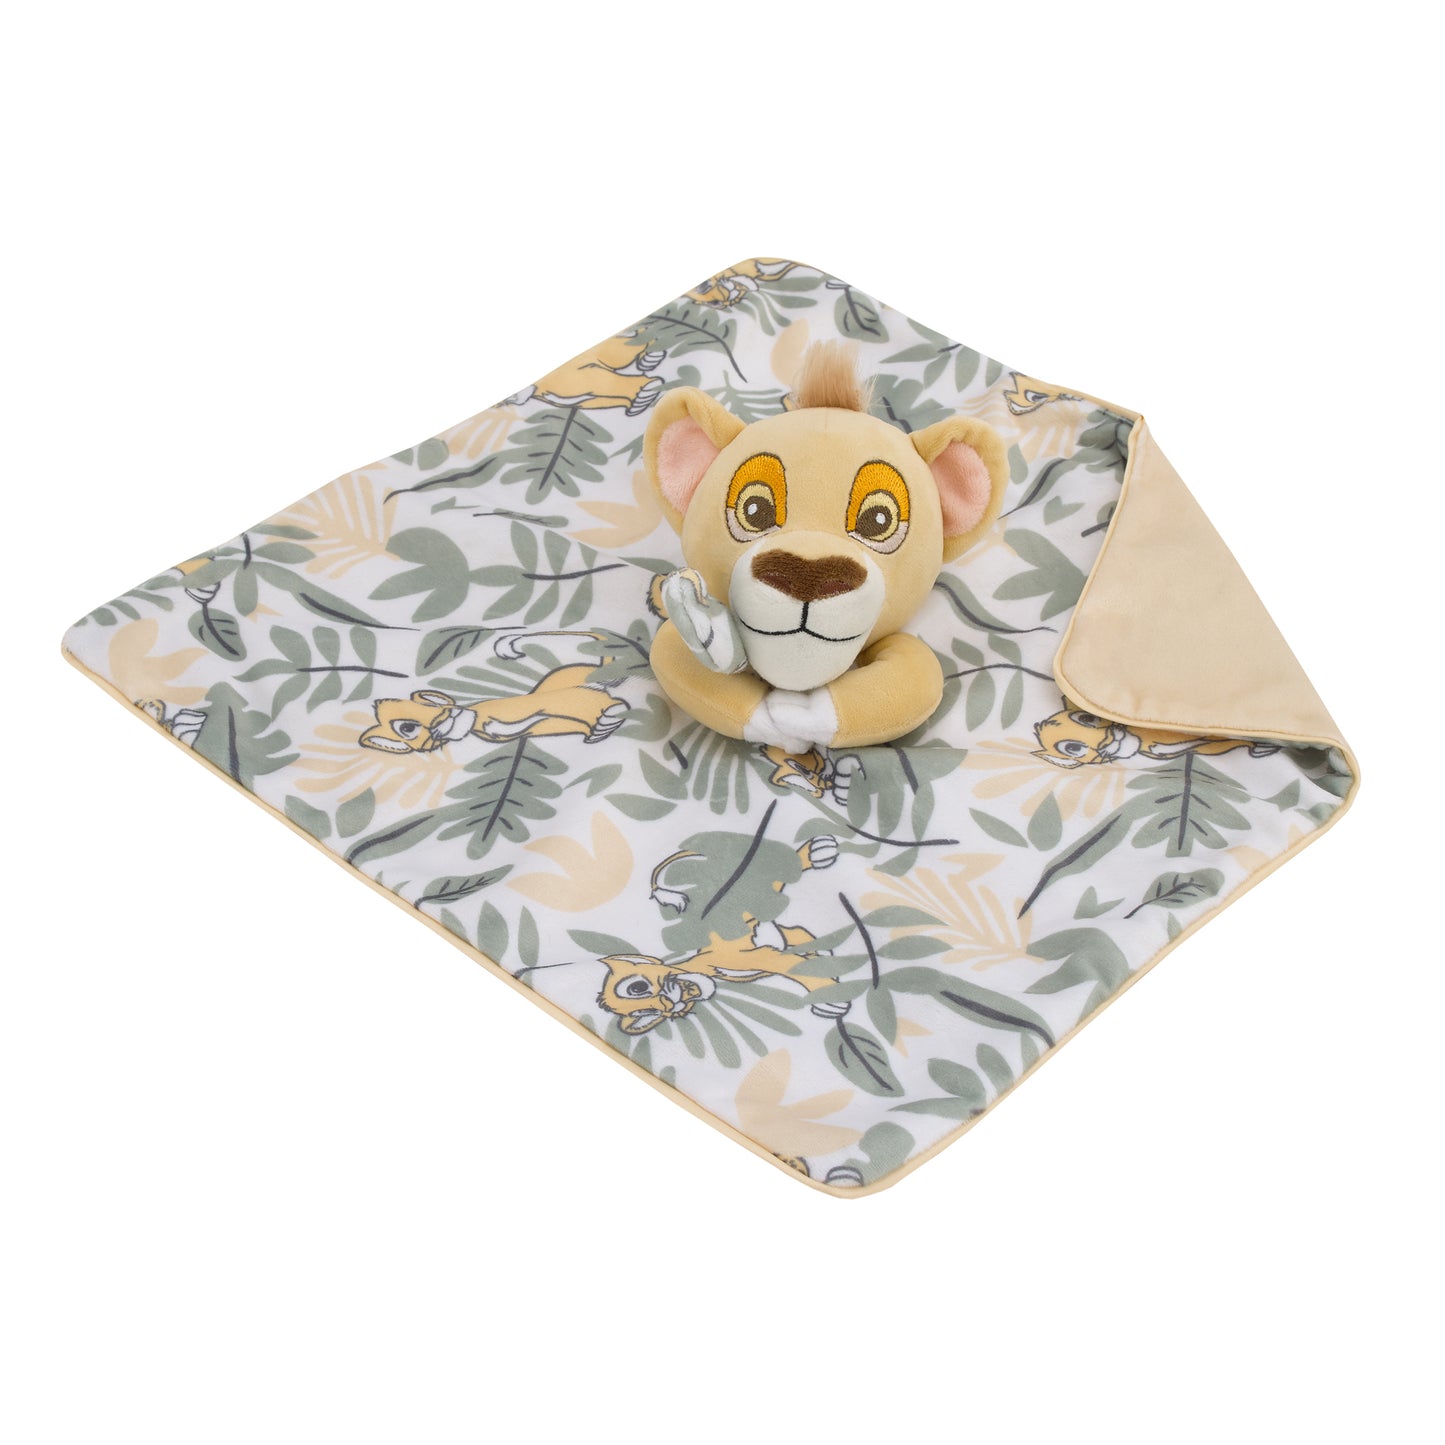 Disney Lion King Simba Yellow, Green, and White Jungle Leaves Lovey Security Blanket